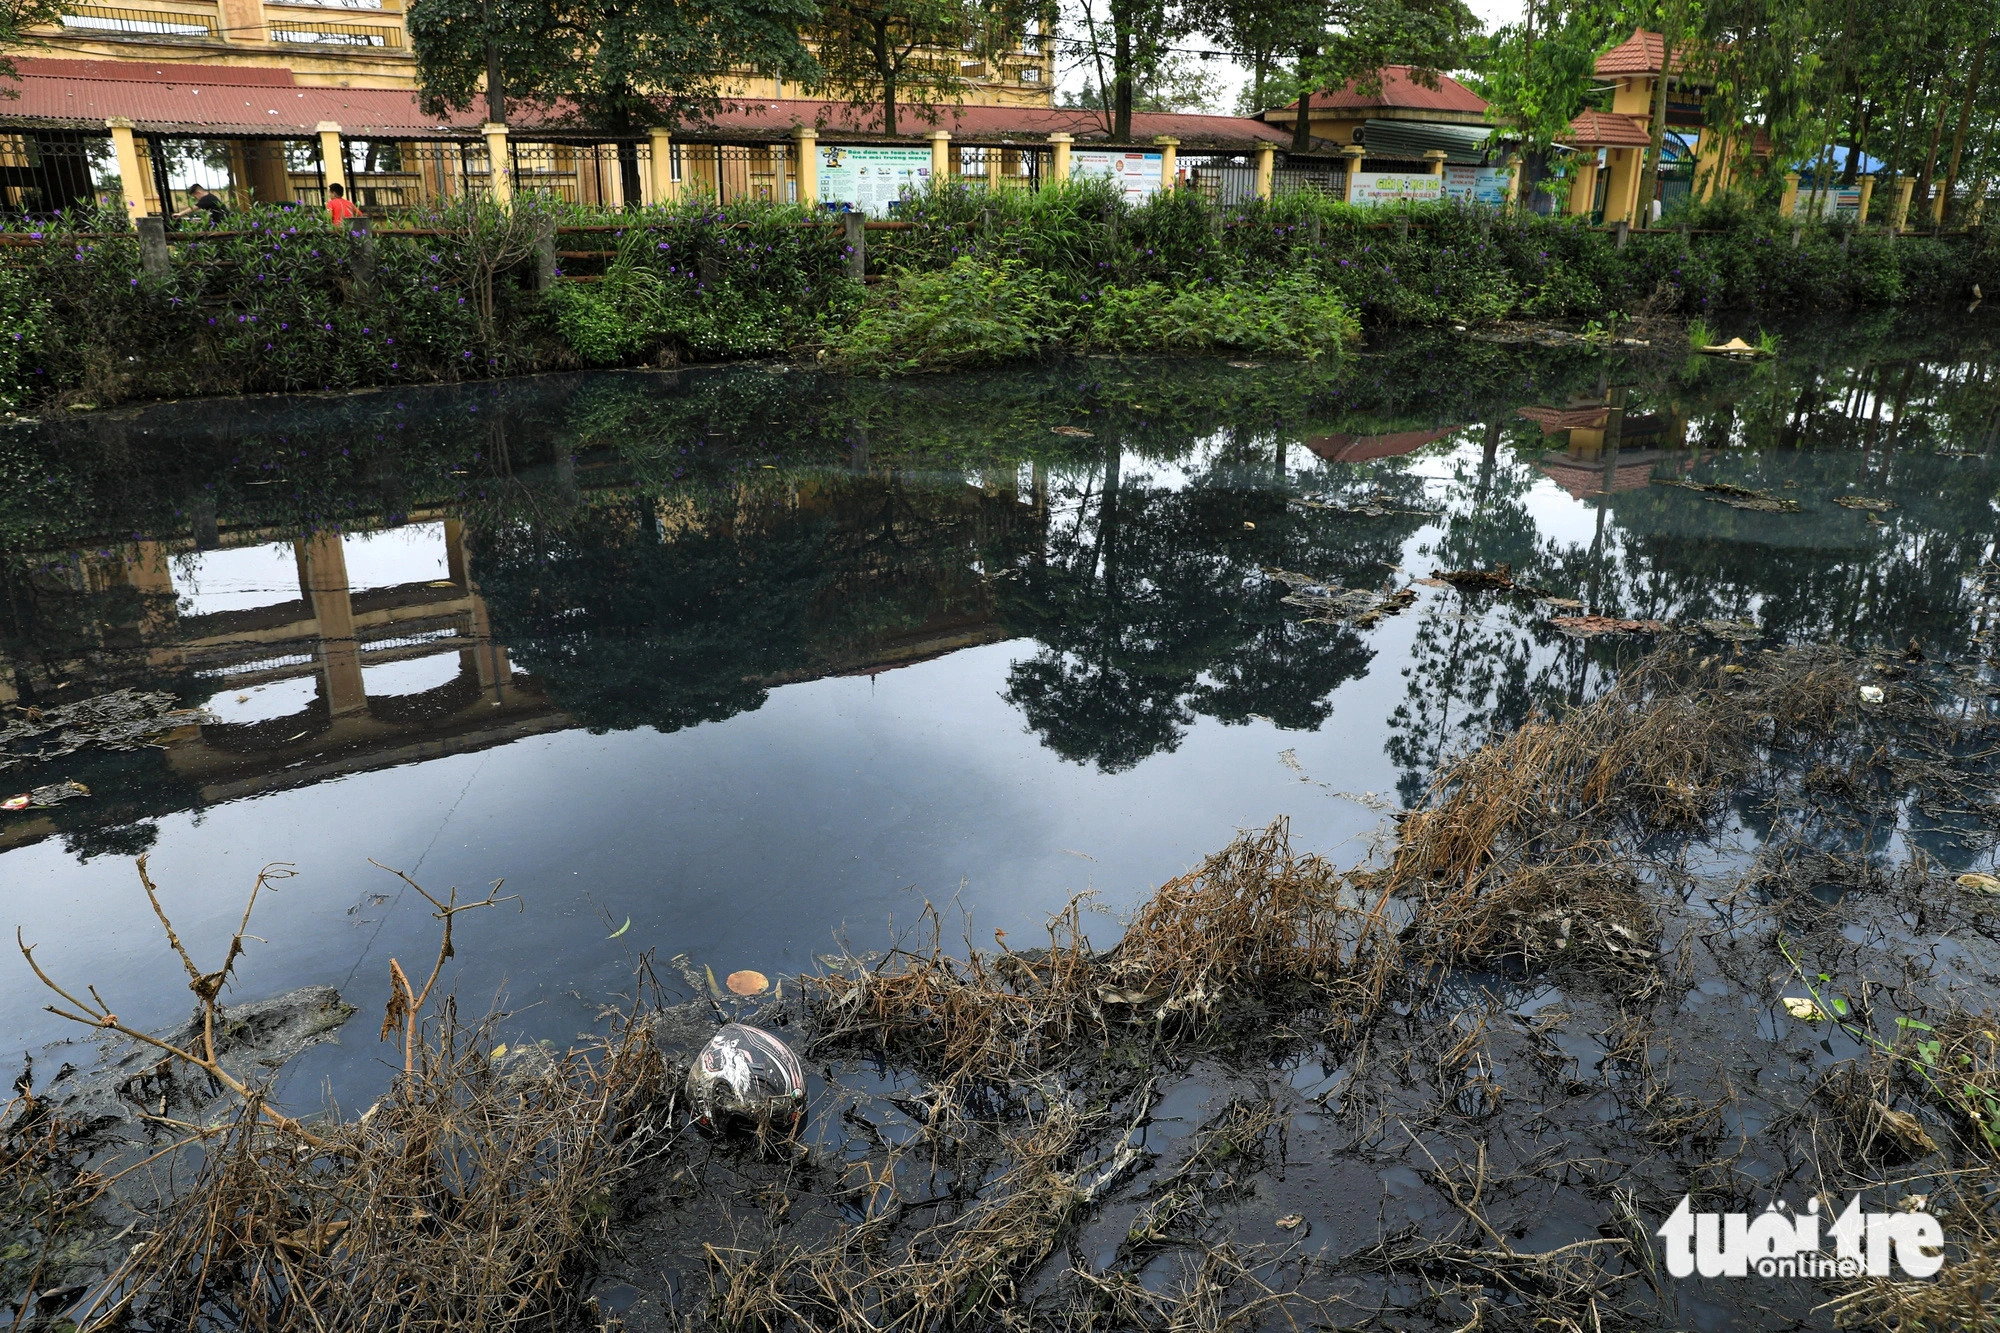 The contaminated channel runs along a local middle school and a medical center in My Hao Town, Hung Yen Province, northern Vietnam. Photo: Tuoi Tre